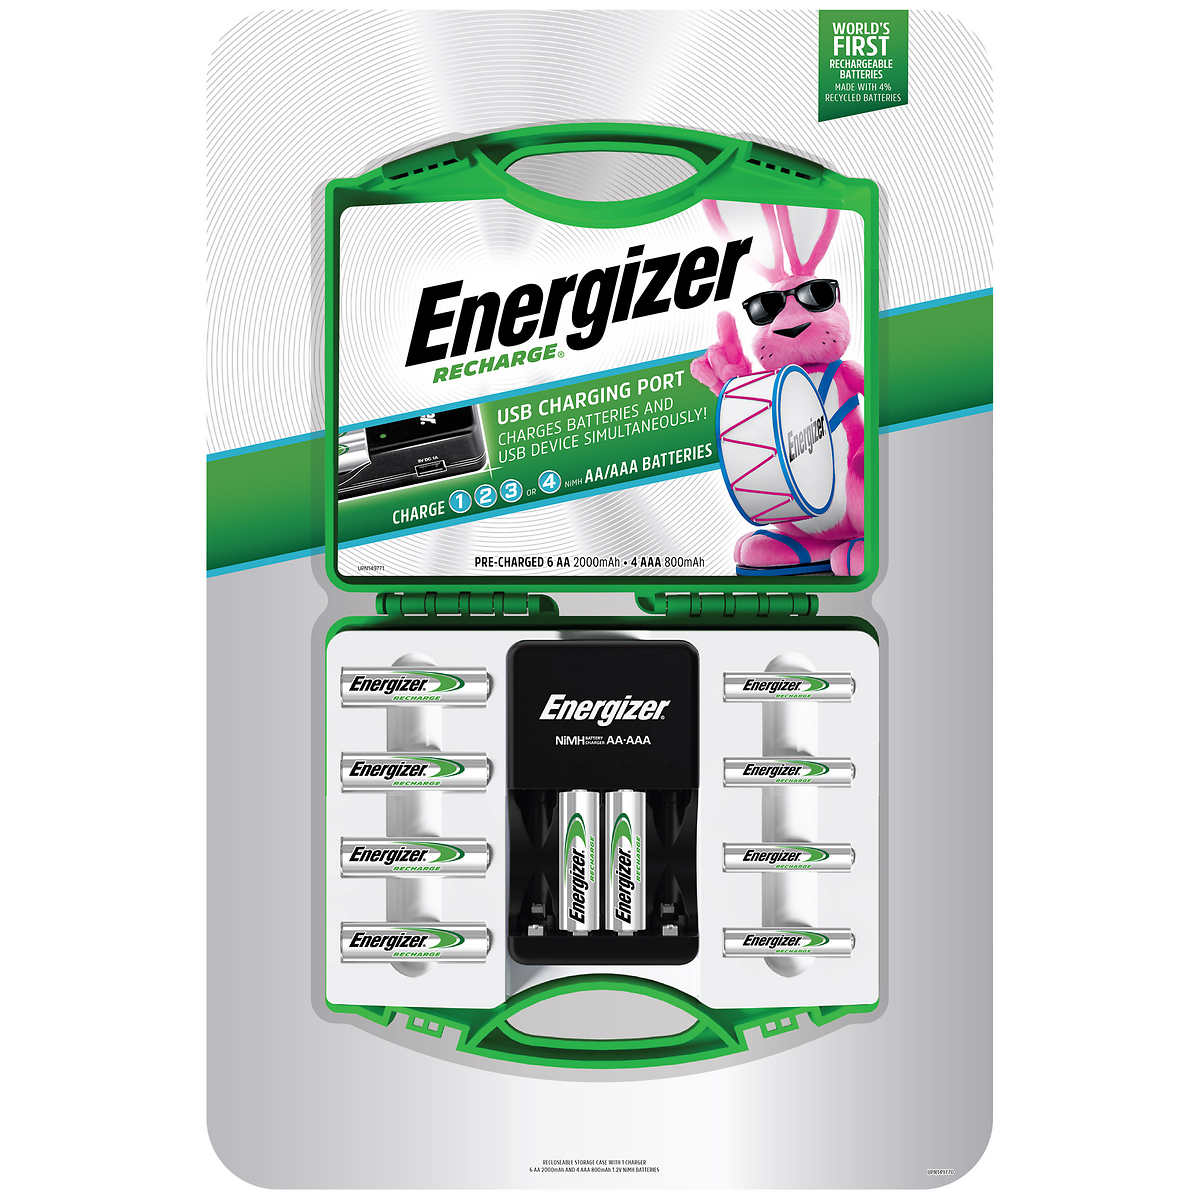 Costco In-store deal only  Energizer rechargeable batteries and charger $12.99